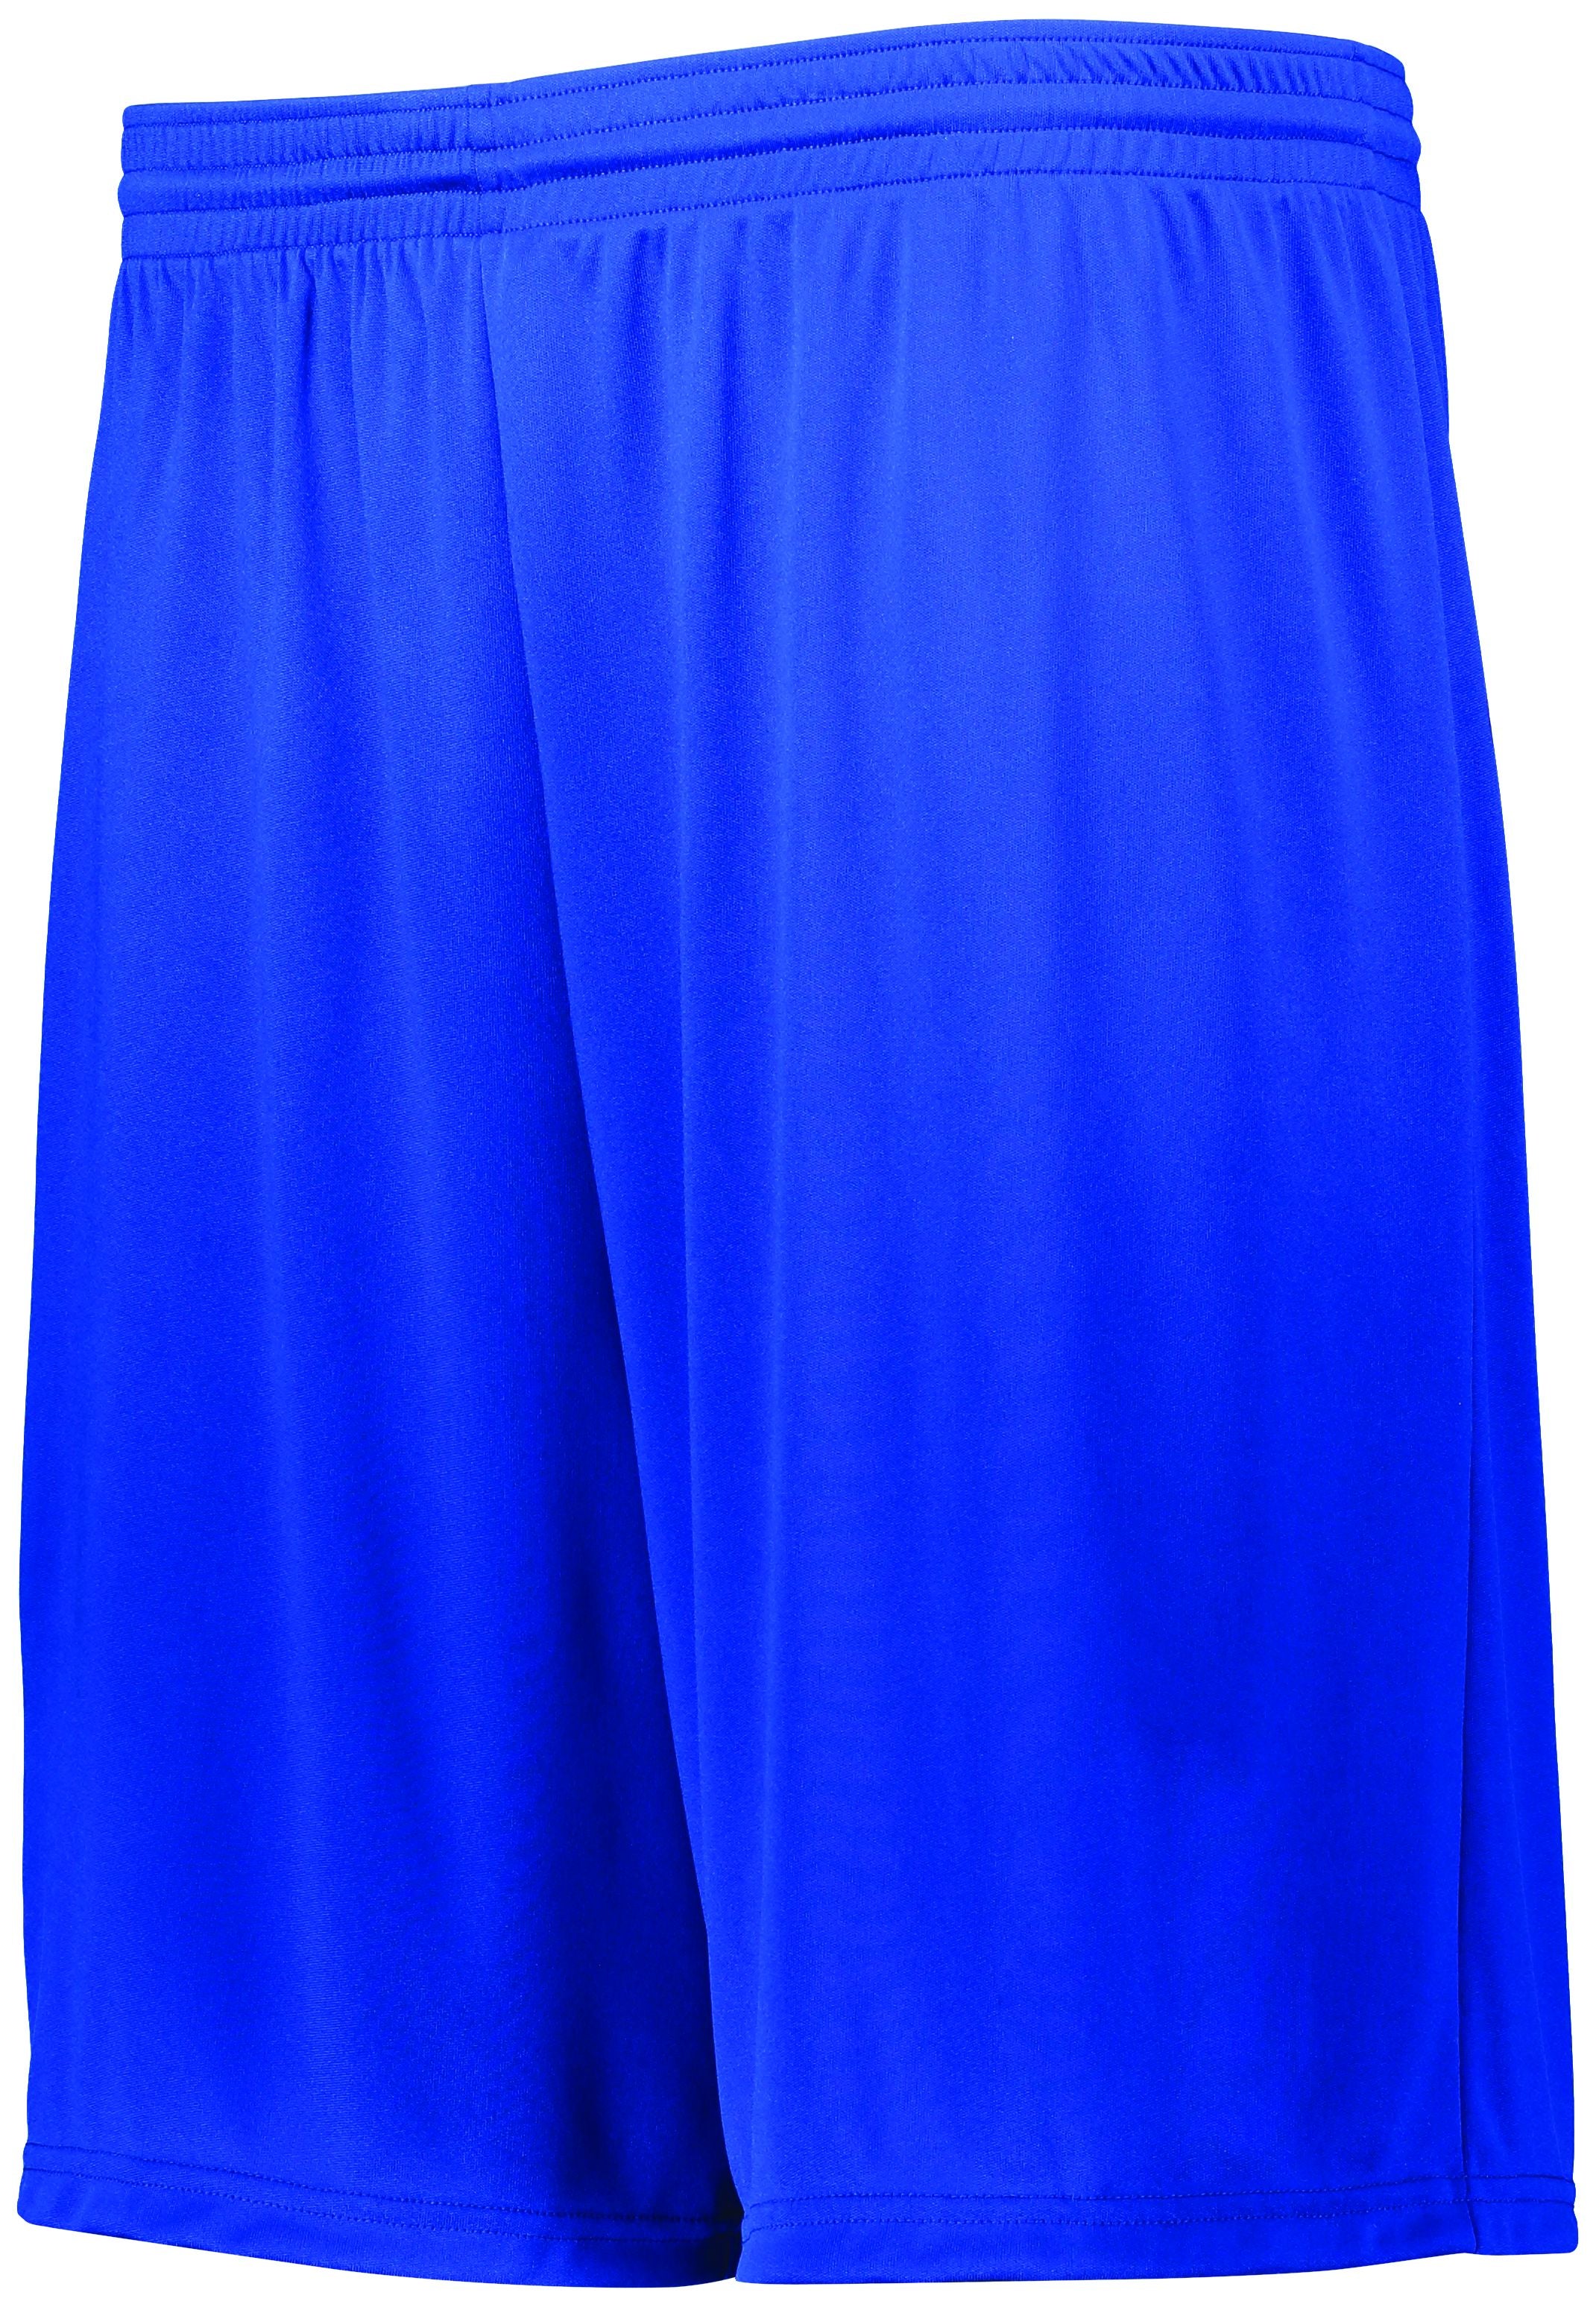 Augusta Sportswear Attain Wicking Shorts in Royal  -Part of the Adult, Adult-Shorts, Augusta-Products product lines at KanaleyCreations.com